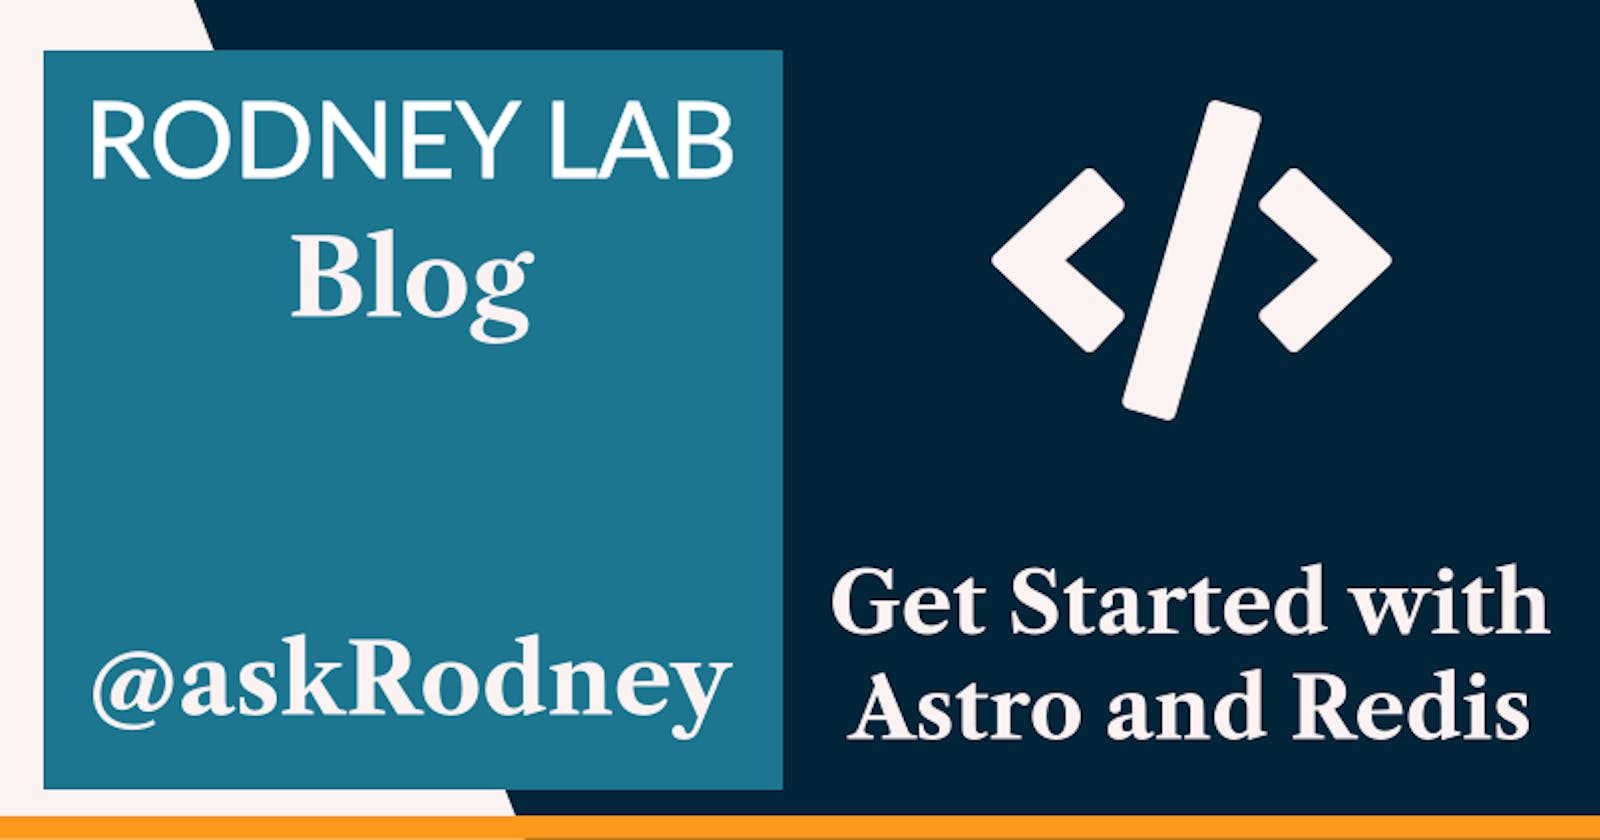 Get Started with Astro and Redis